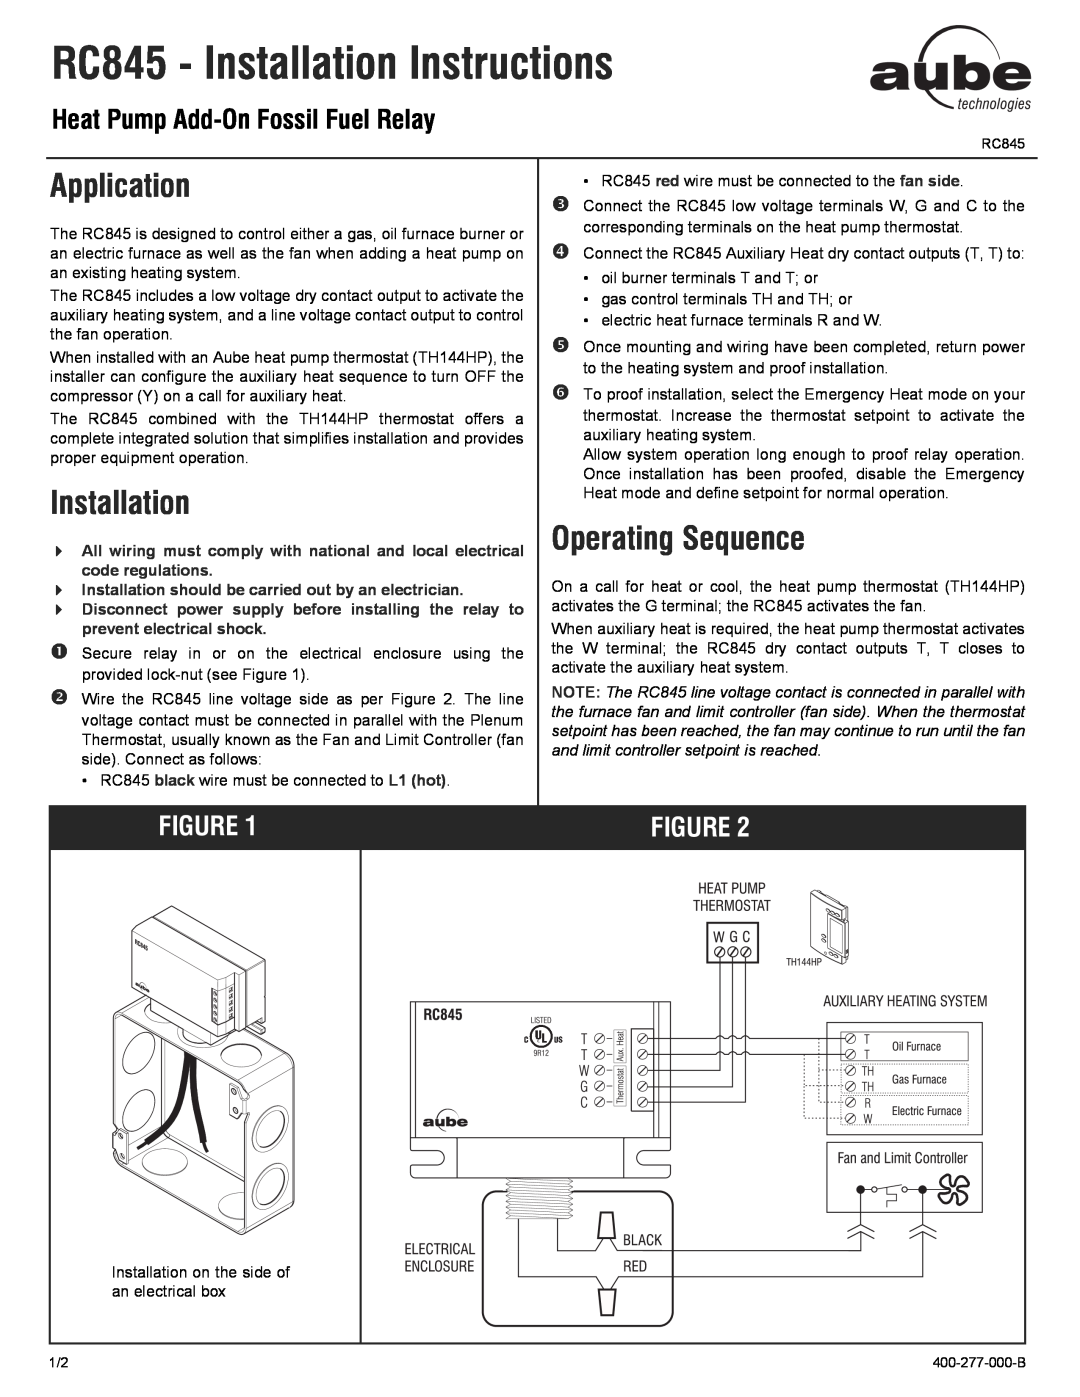 Aube Technologies RC845 installation instructions Application, Installation, Operating Sequence 